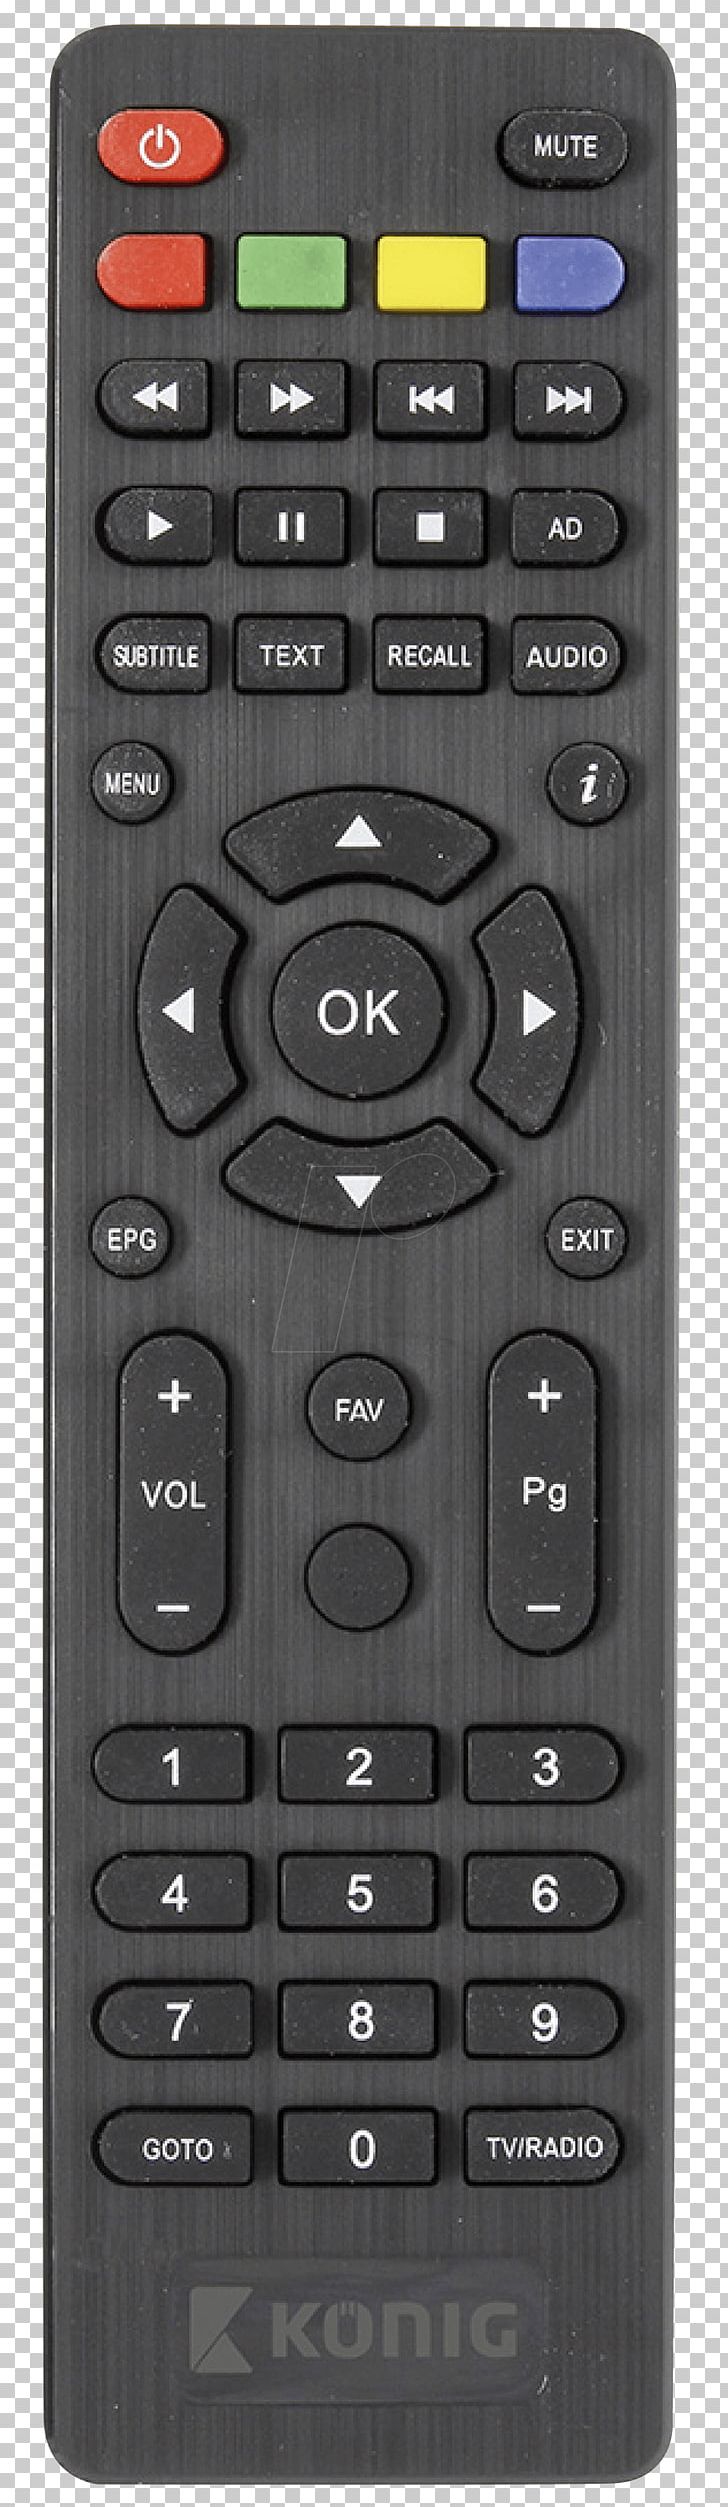 Remote Controls High Efficiency Video Coding Electronics DVB-T2 Digital Video Broadcasting PNG, Clipart, 1080p, Cable Converter Box, Digital Television, Digital Video Broadcasting, Electronic Device Free PNG Download